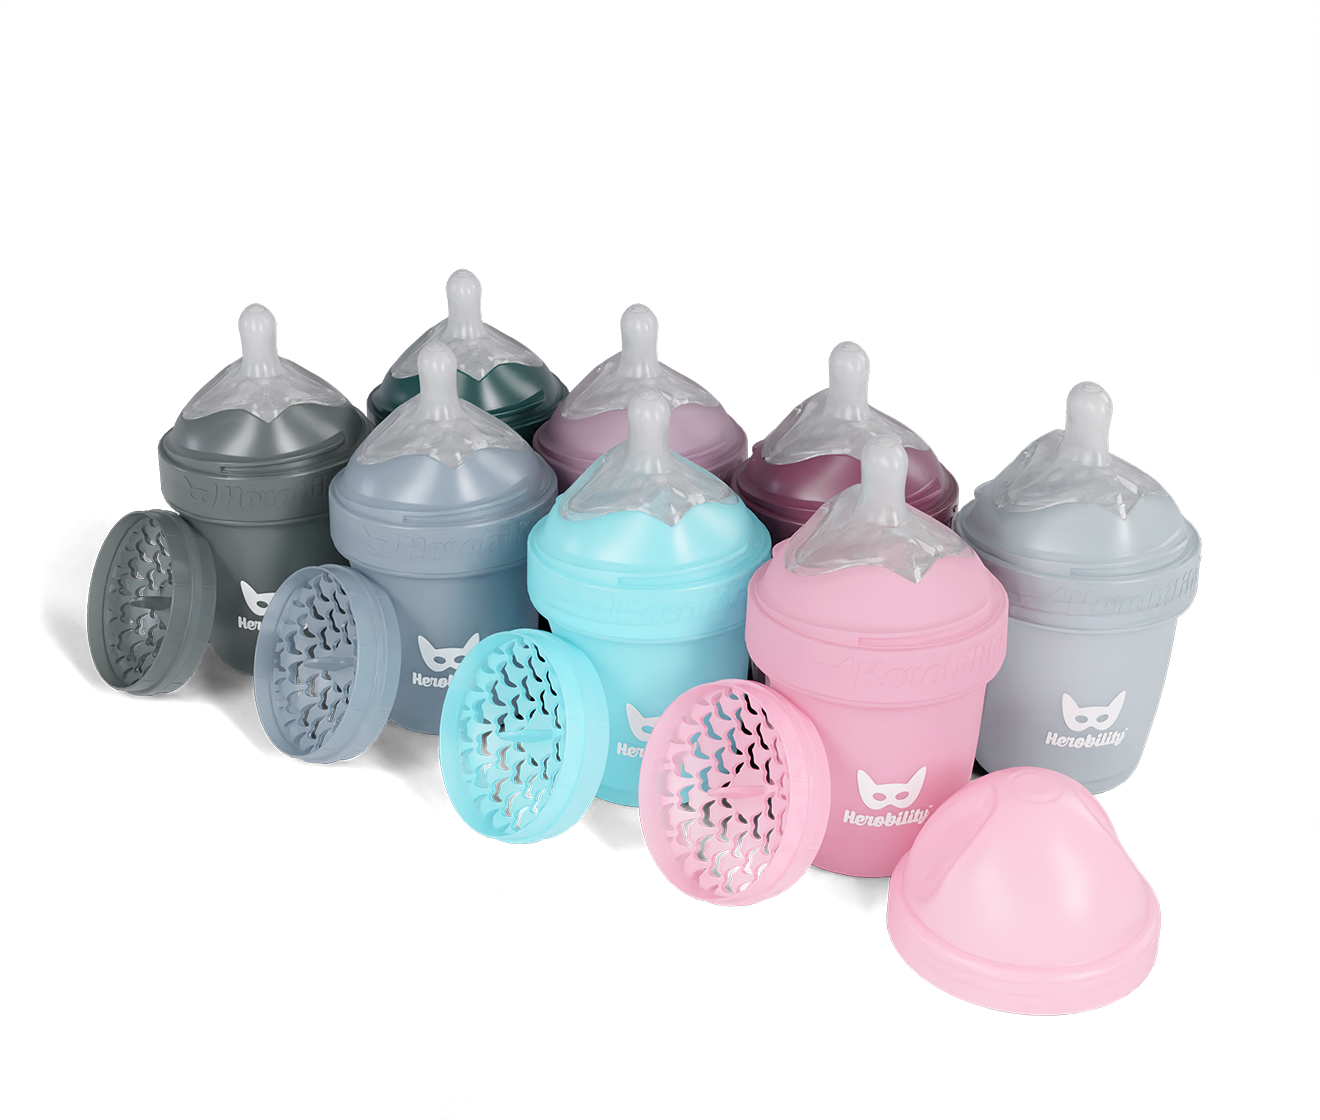 8-pack LT 140ml/5 floz Baby Bottles with 60% discount